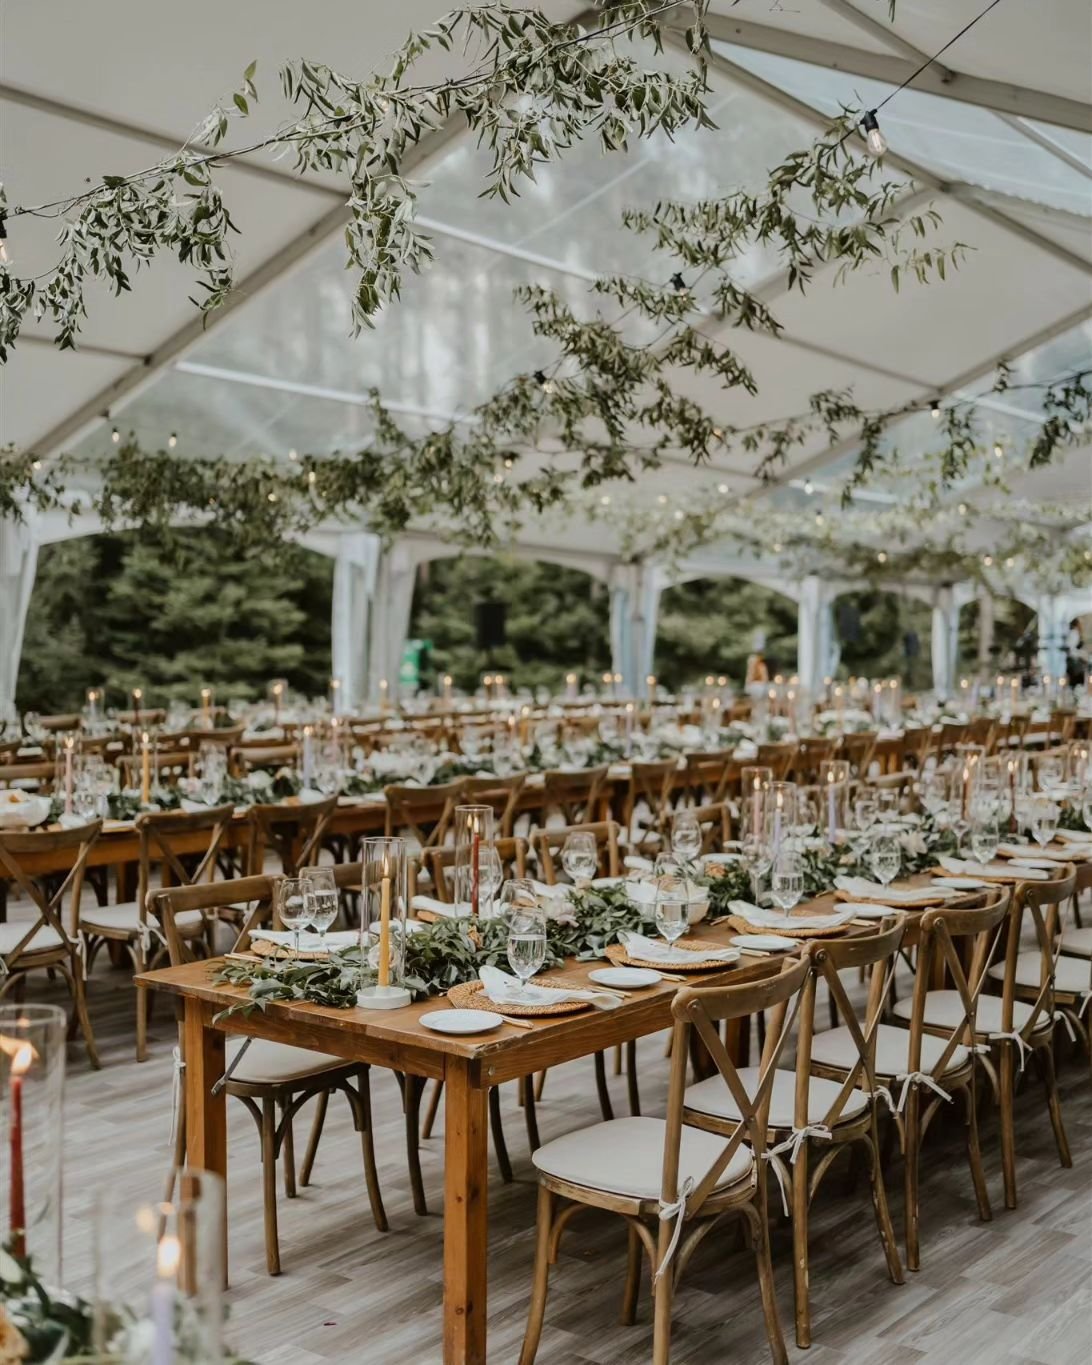 A classic and timeless tented wedding reception 🤍

Cissy and Adam | Private Estate Planning

📷 @jessilynnwongphotography